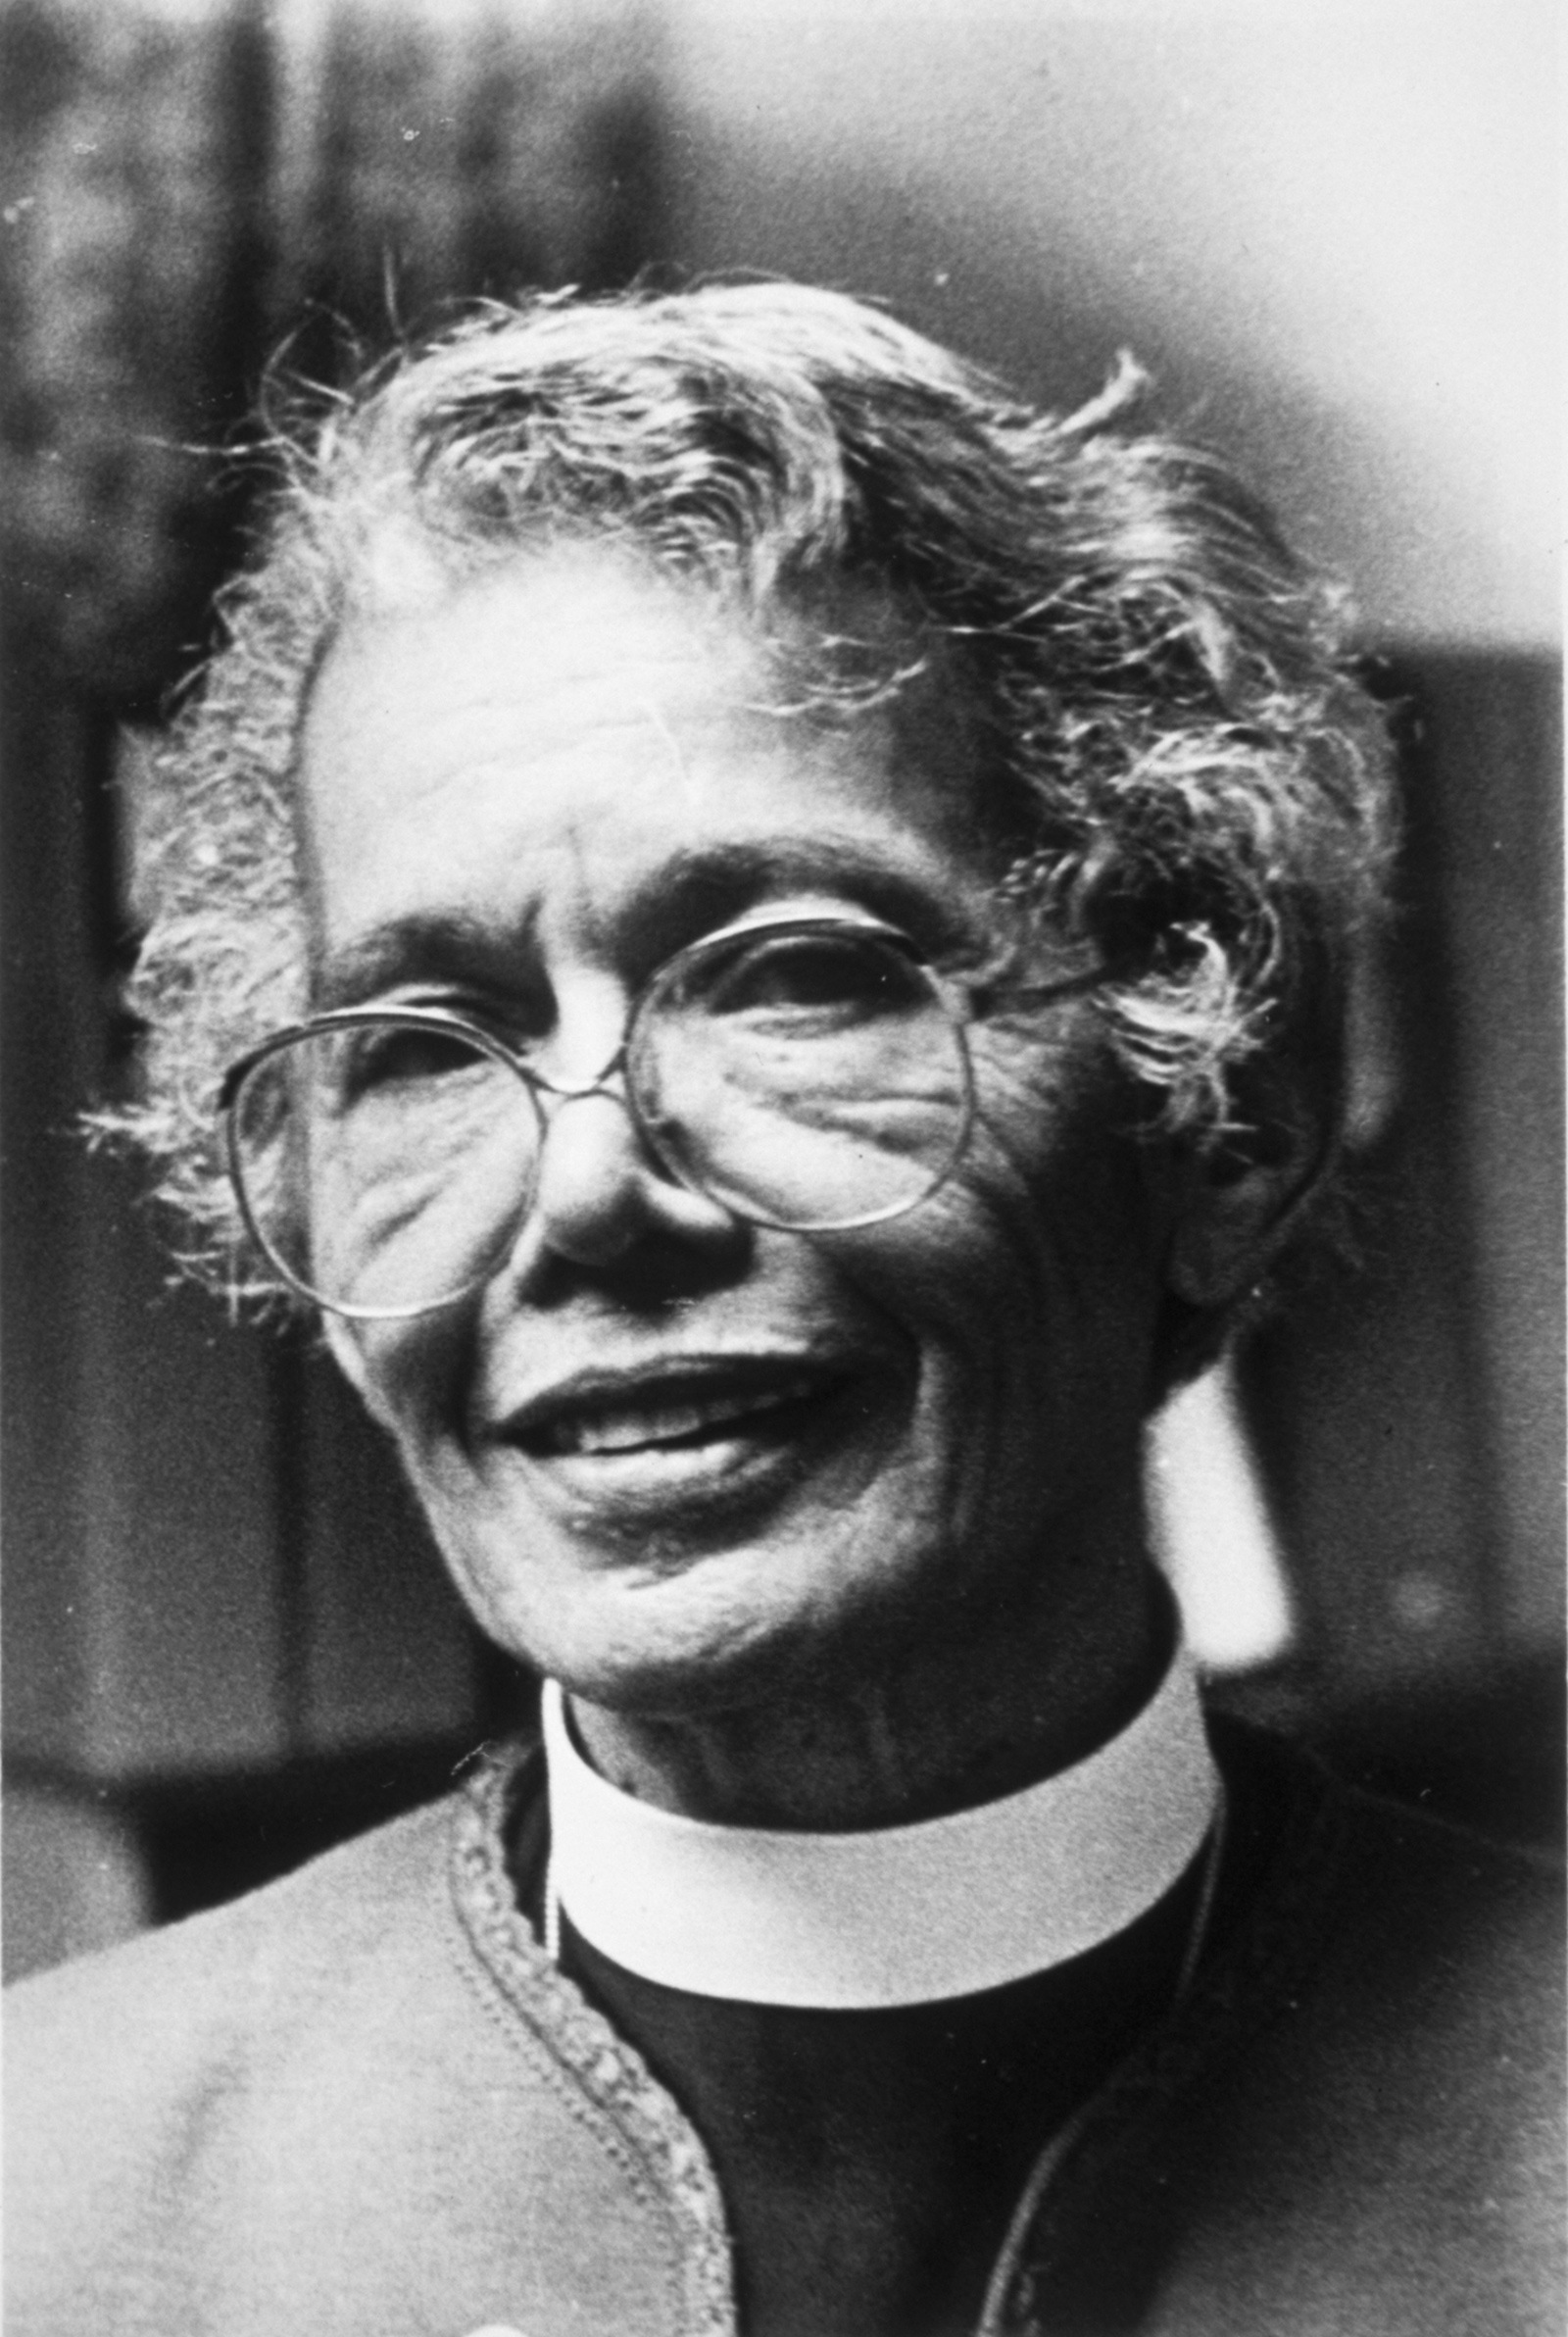 The civil rights activist Pauli Murray, circa 1977. Yale has announced that one of its new residential colleges will be named for her.